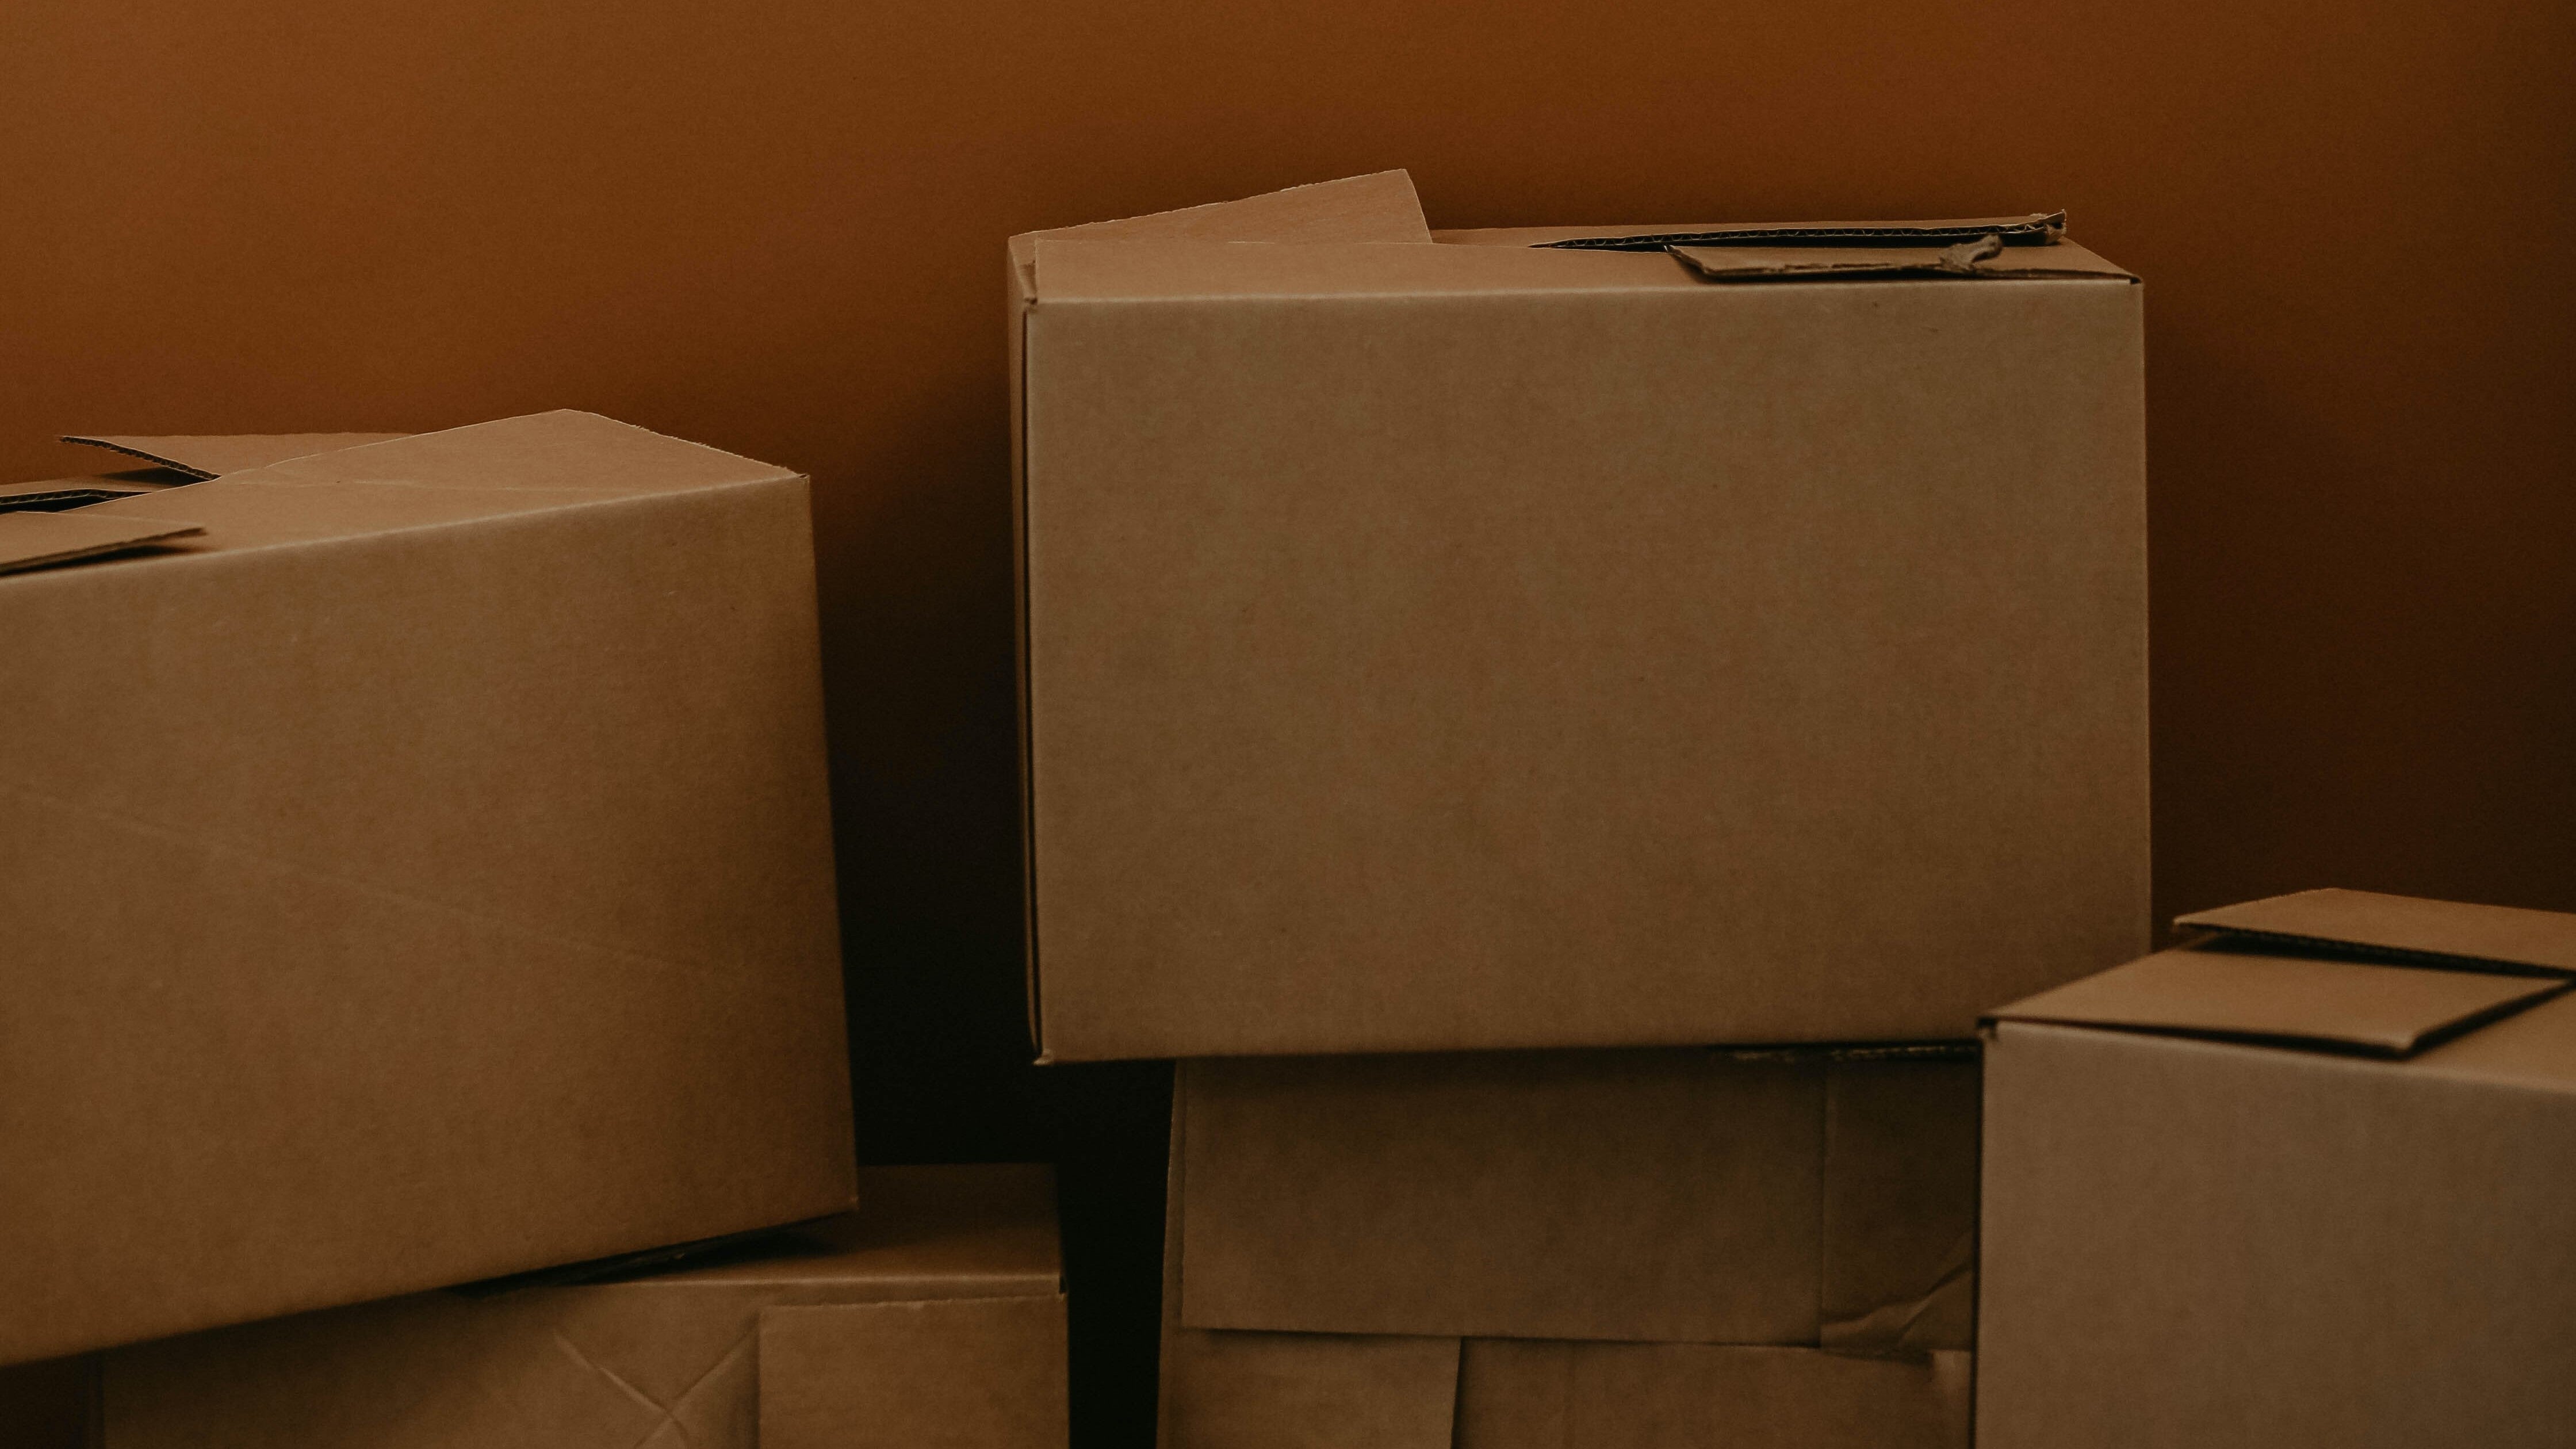 The 6 reasons why cardboard shipping box prices are going up